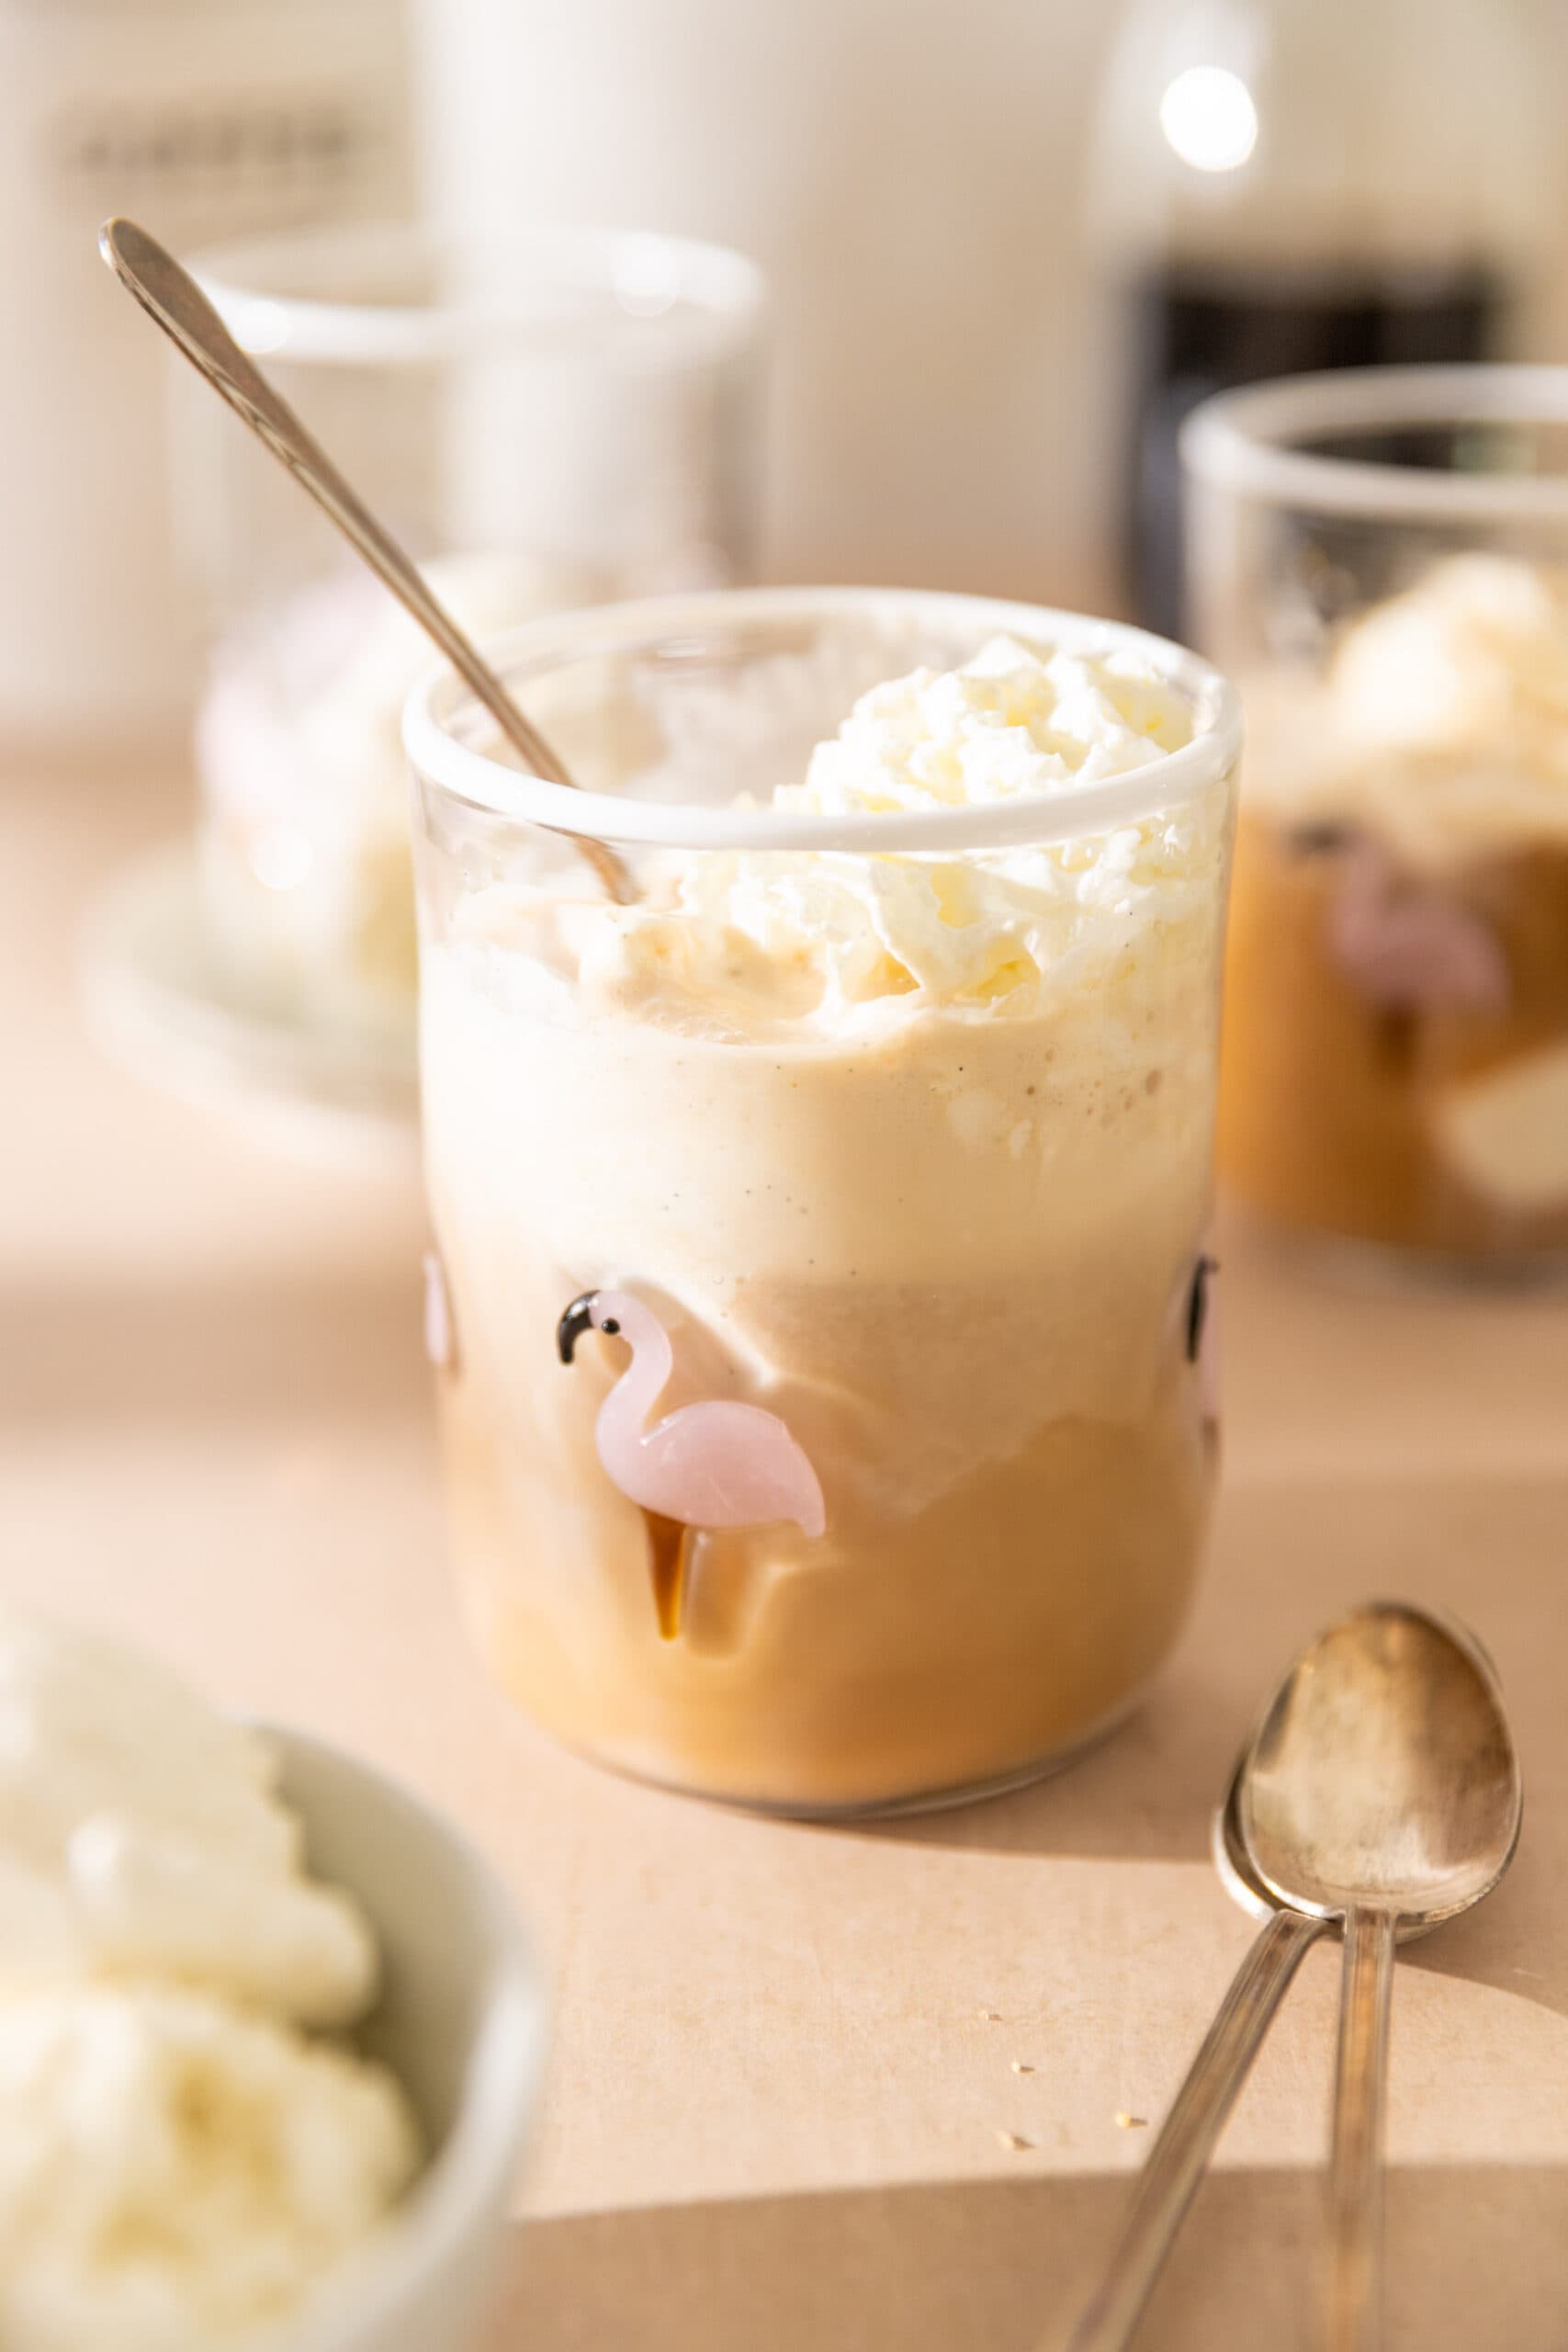 Side view of a clear glass filled with coffee, vanilla ice cream, and topped with whipped cream.